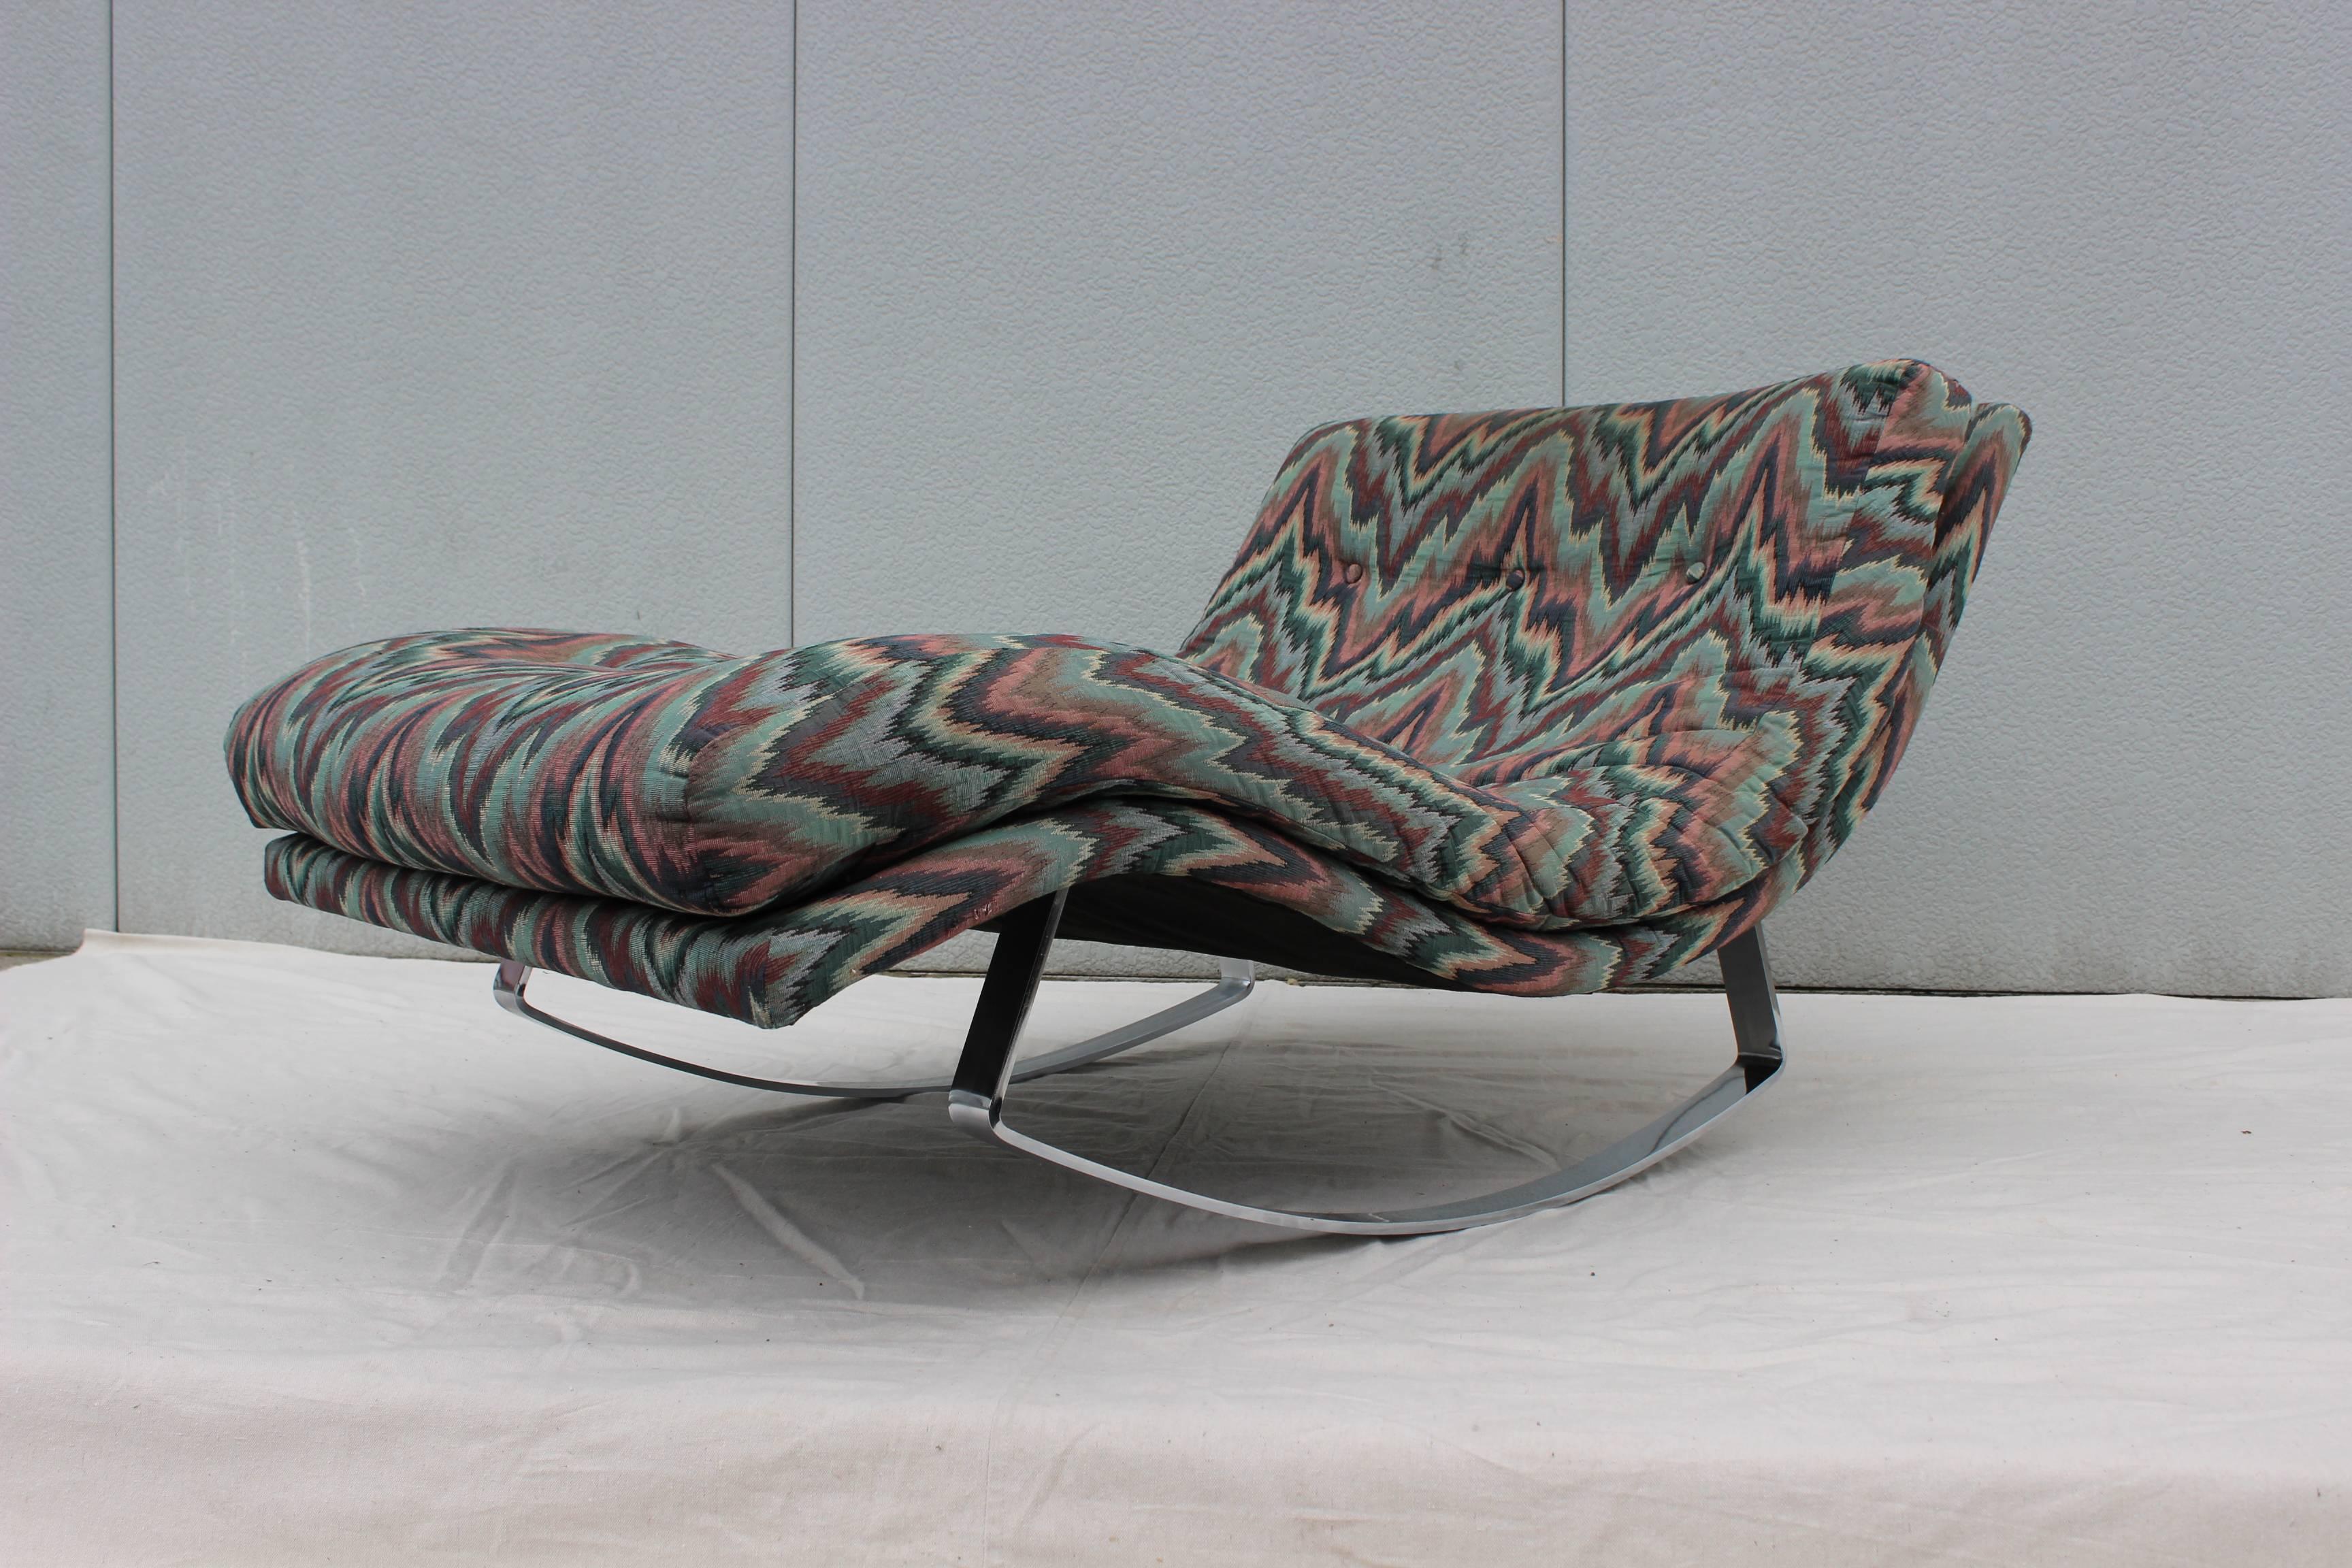 1970's steel base with chrome finish rocking chaise longue, in vintage upholstery. 